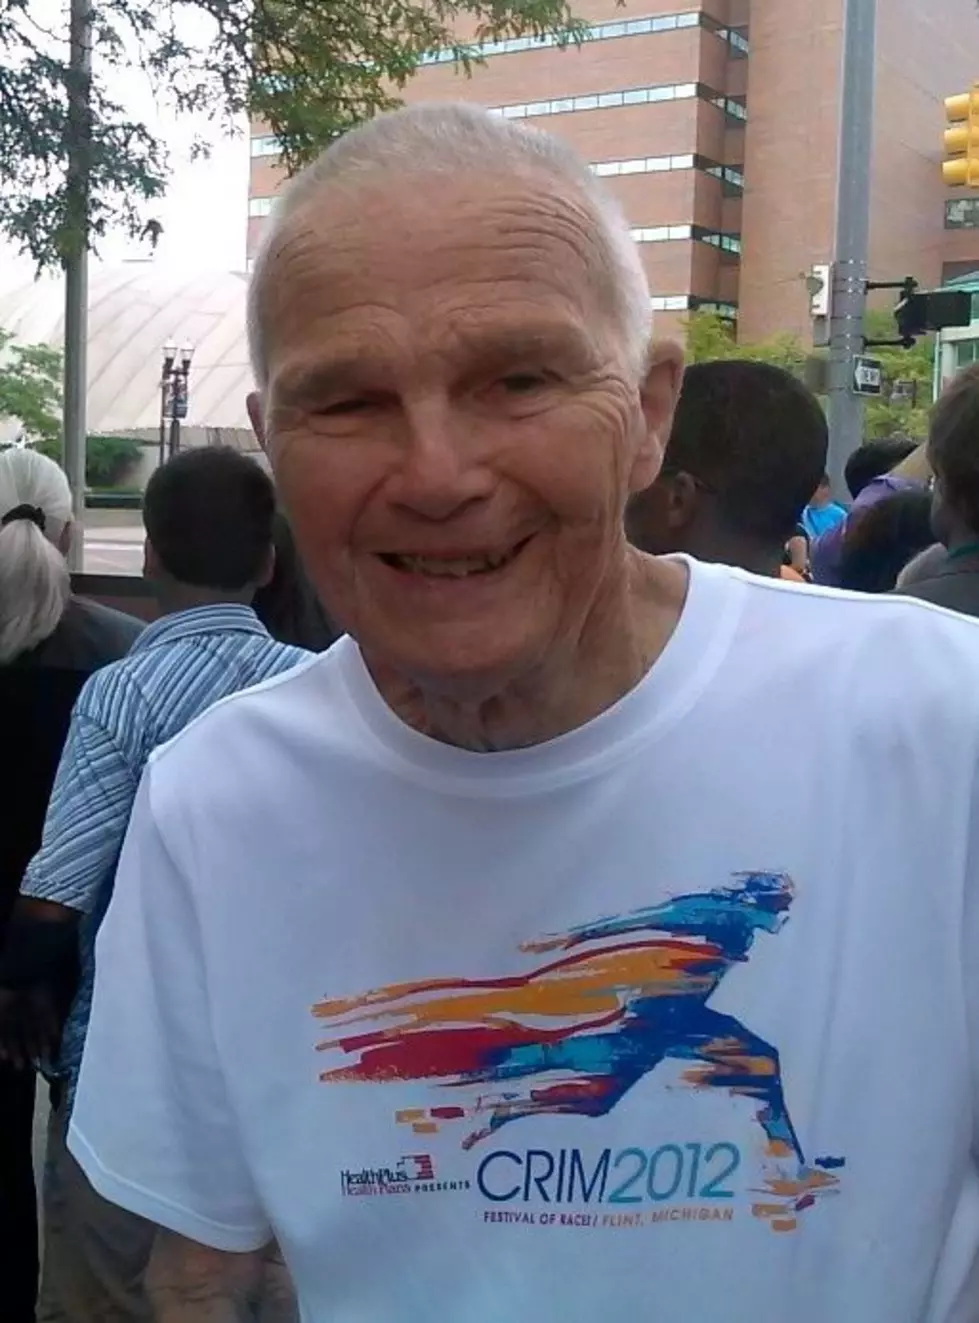 Flint Runner Bill Hayes Loved The Crim So Much, He Was Buried In His Race Shirt